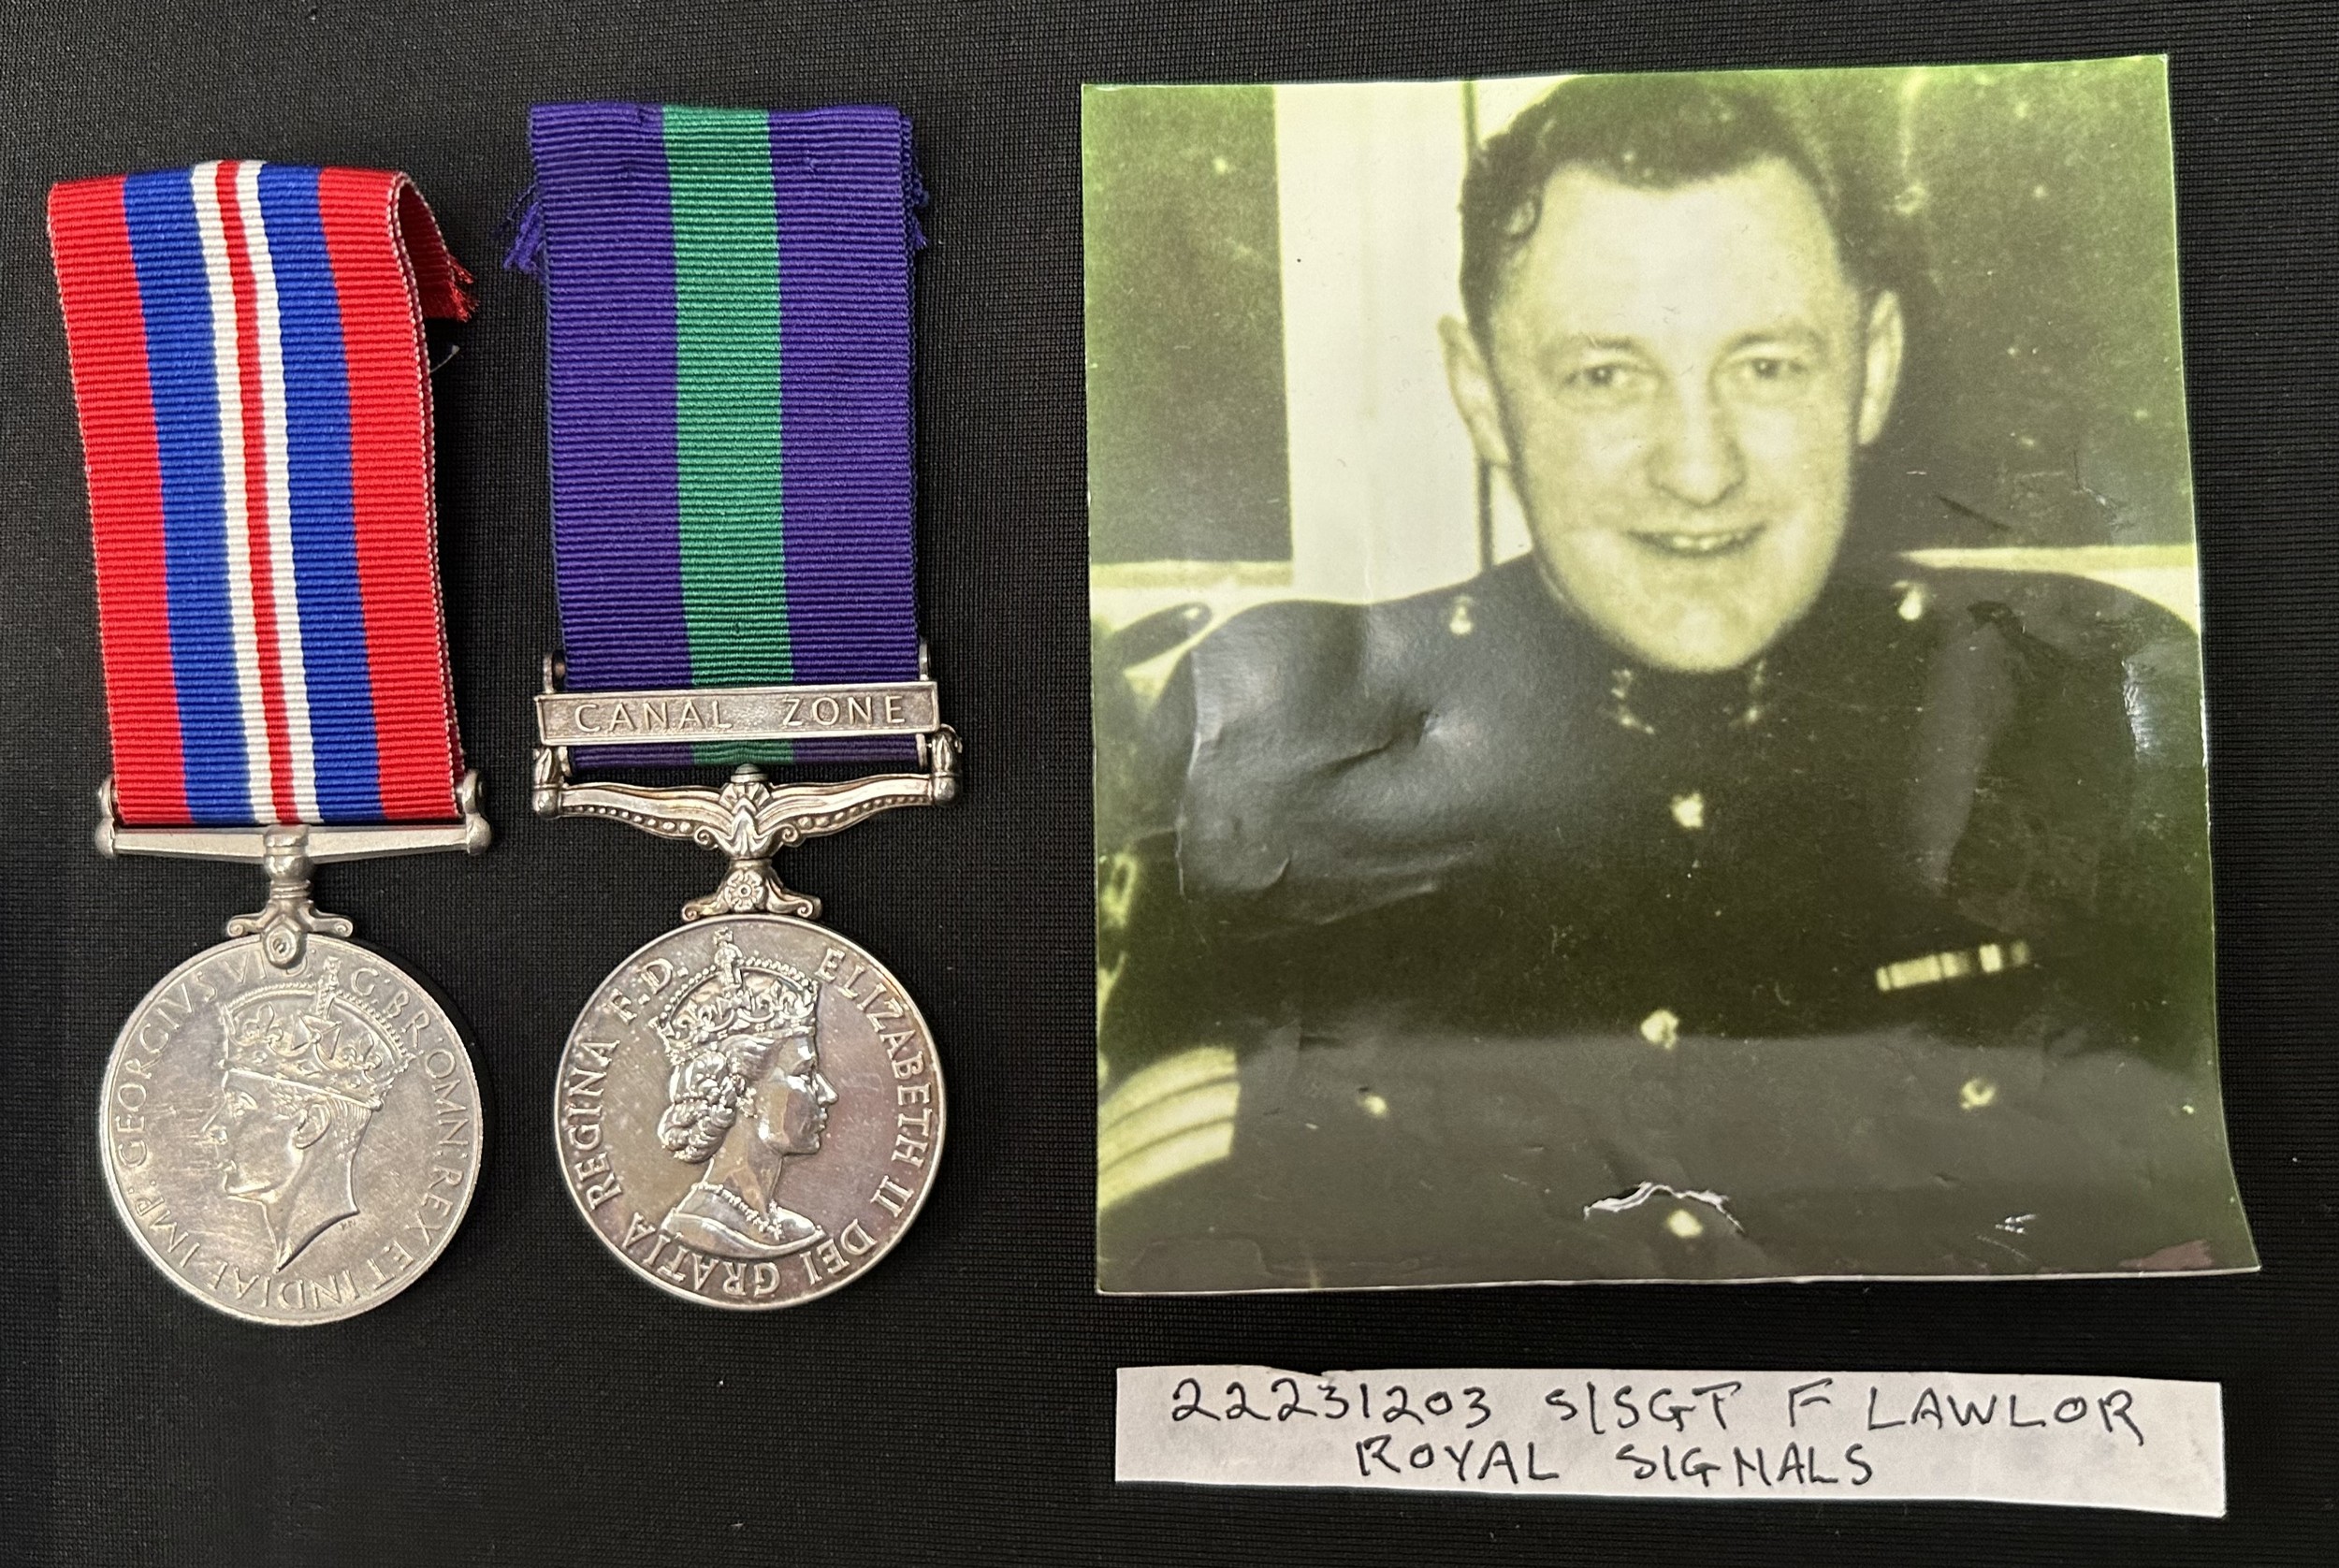 WW2 British Medal Group to 22231203 Sgt F Lawlor, Royal Signals comprising of ERII General Service - Image 2 of 5